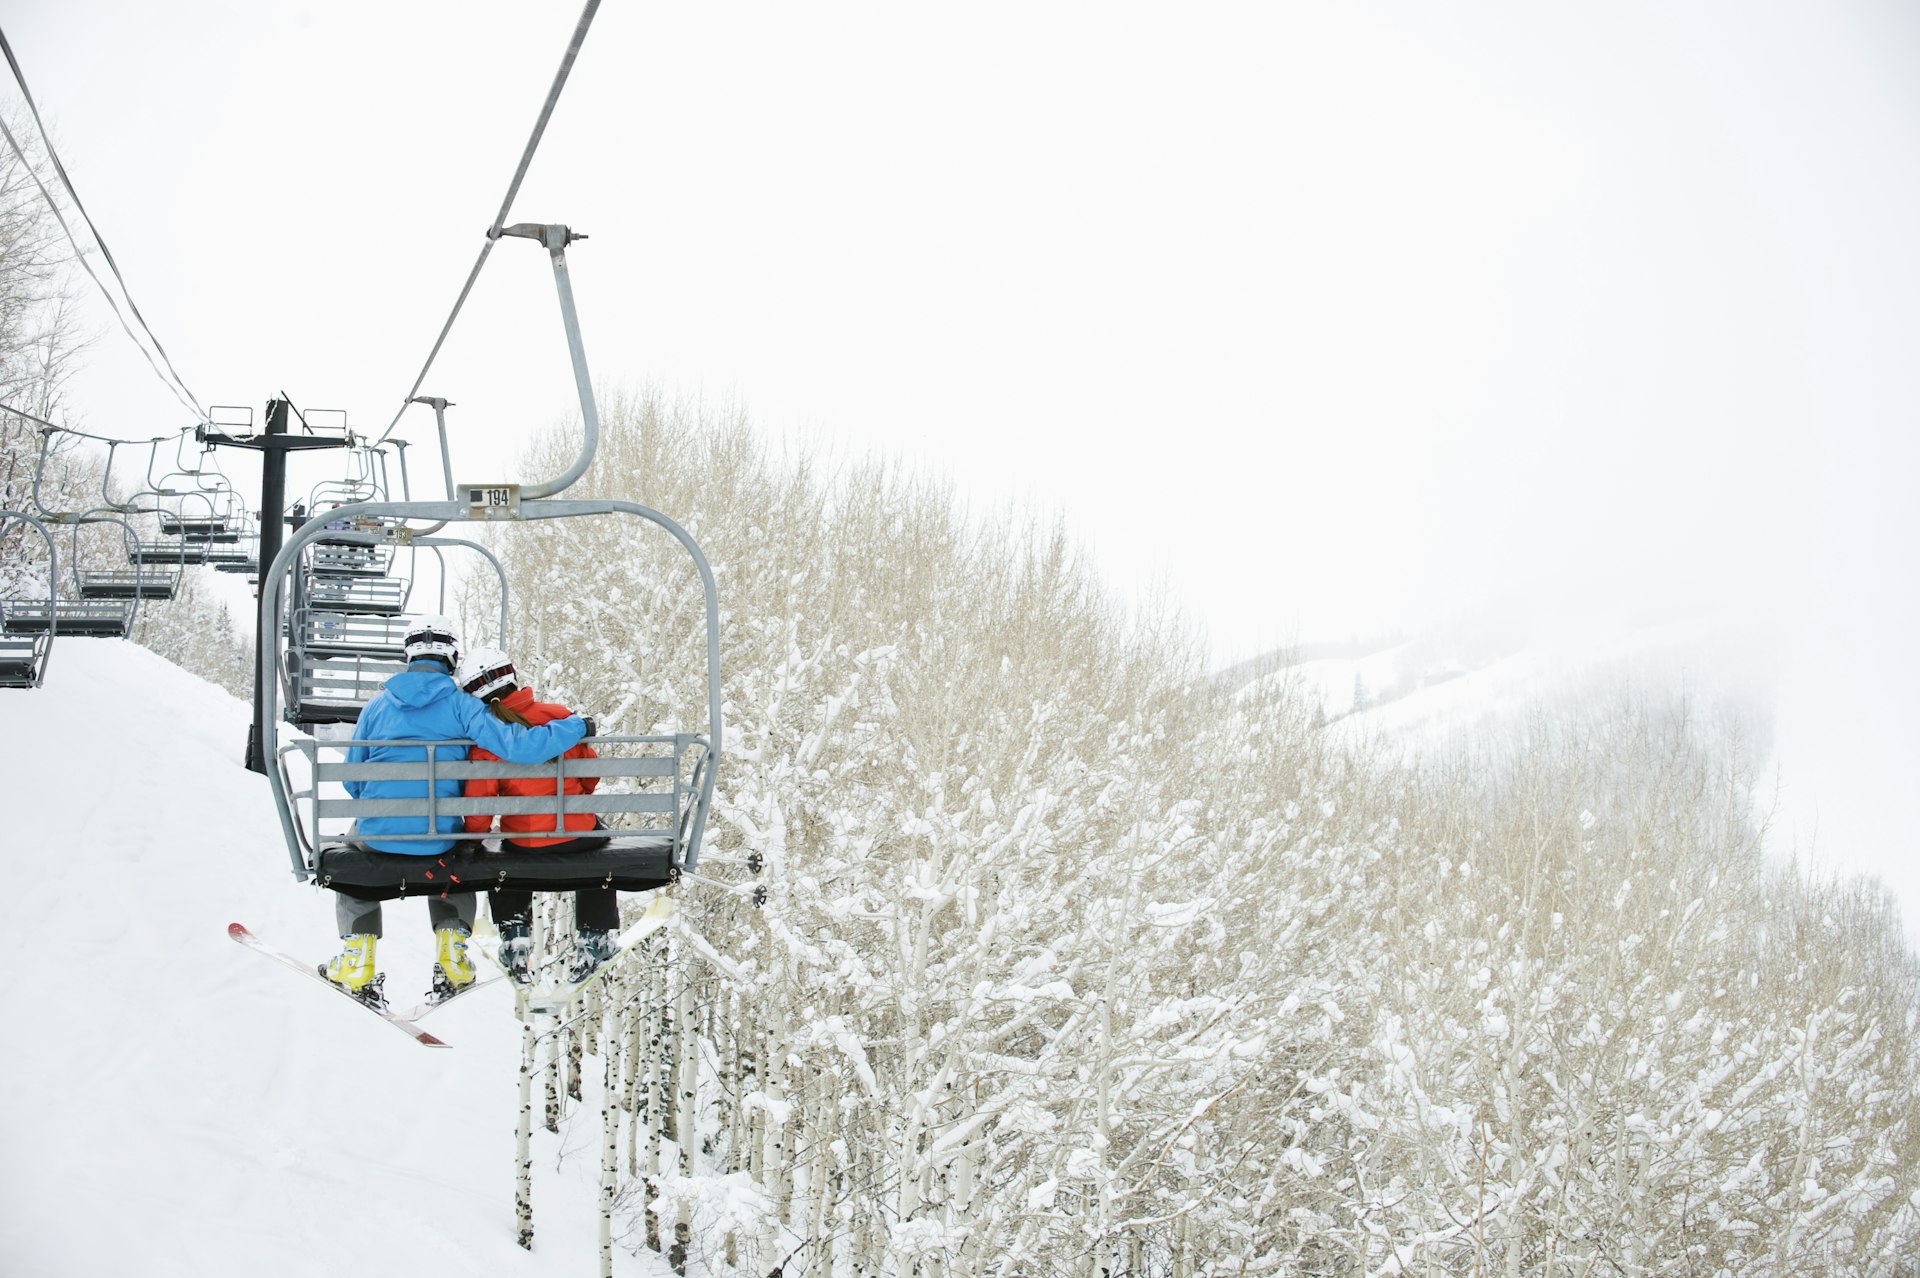 A man with his arm around a skier on a chairlift